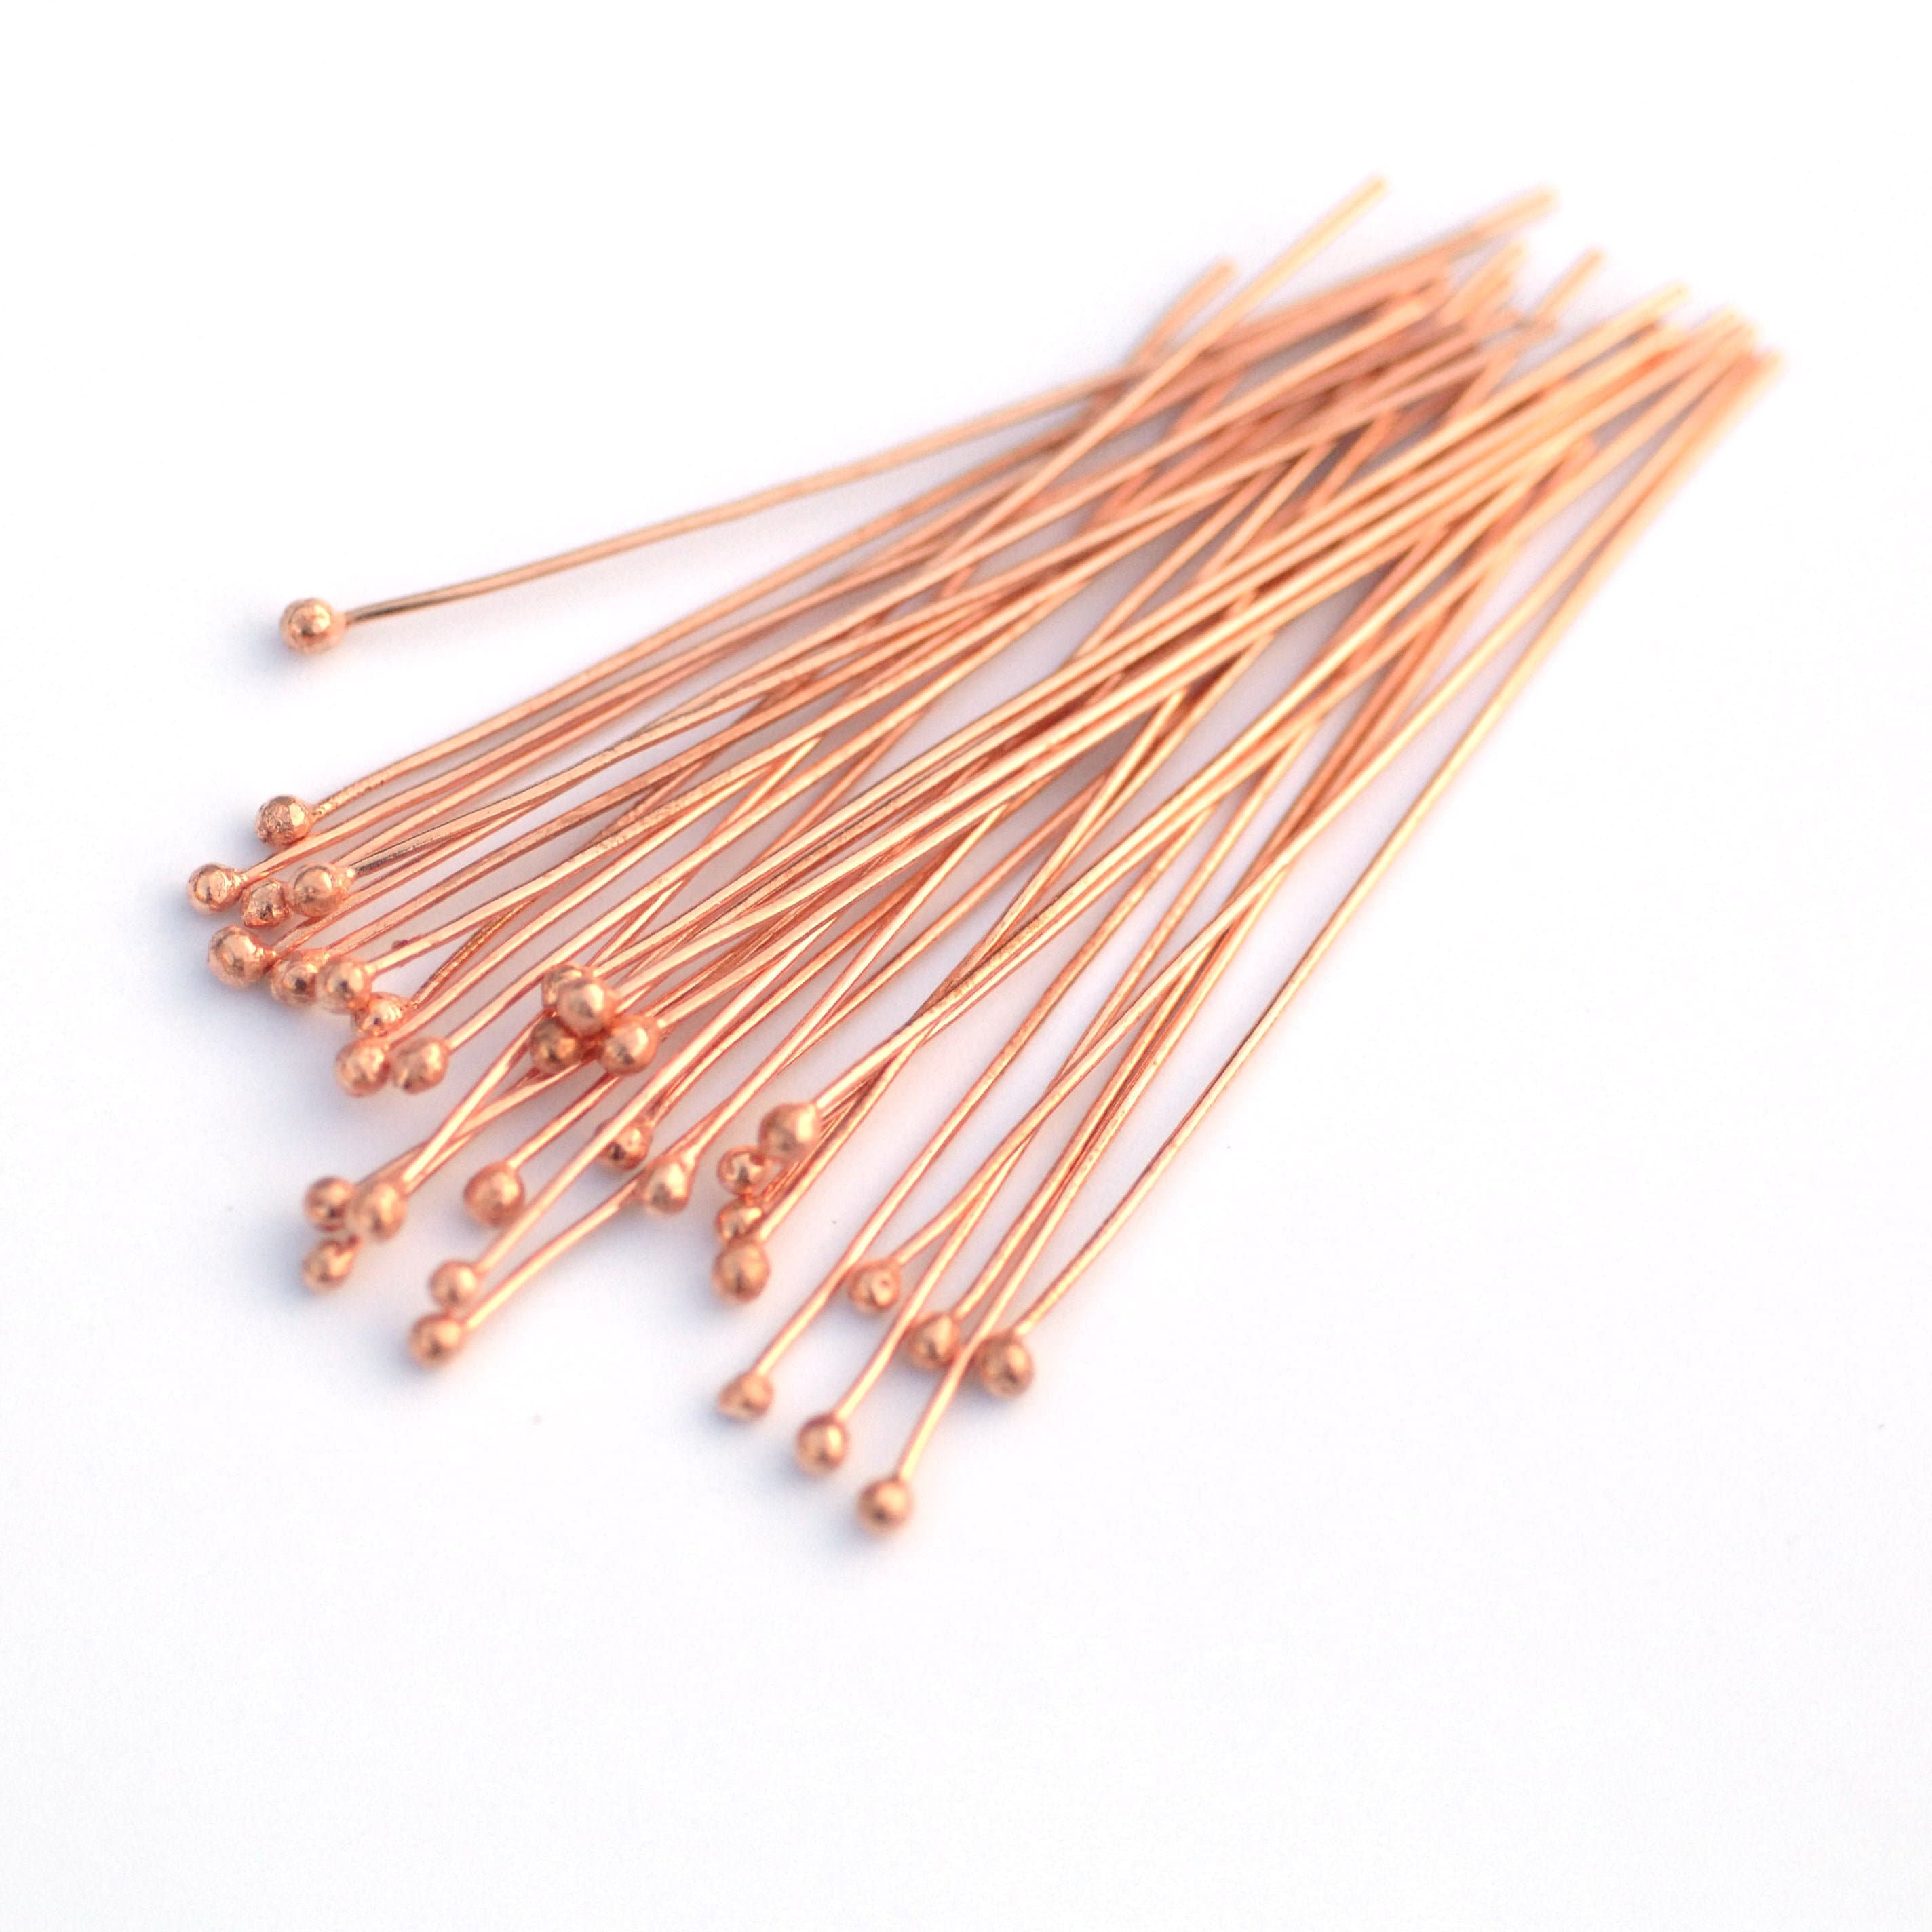 30 Pieces of Shiny Rose Gold Jewelry Pins, Ball Pins / Head Pins, Pins for  Beads, Flexible Headpins B004-BRG-30 30 Pcs 